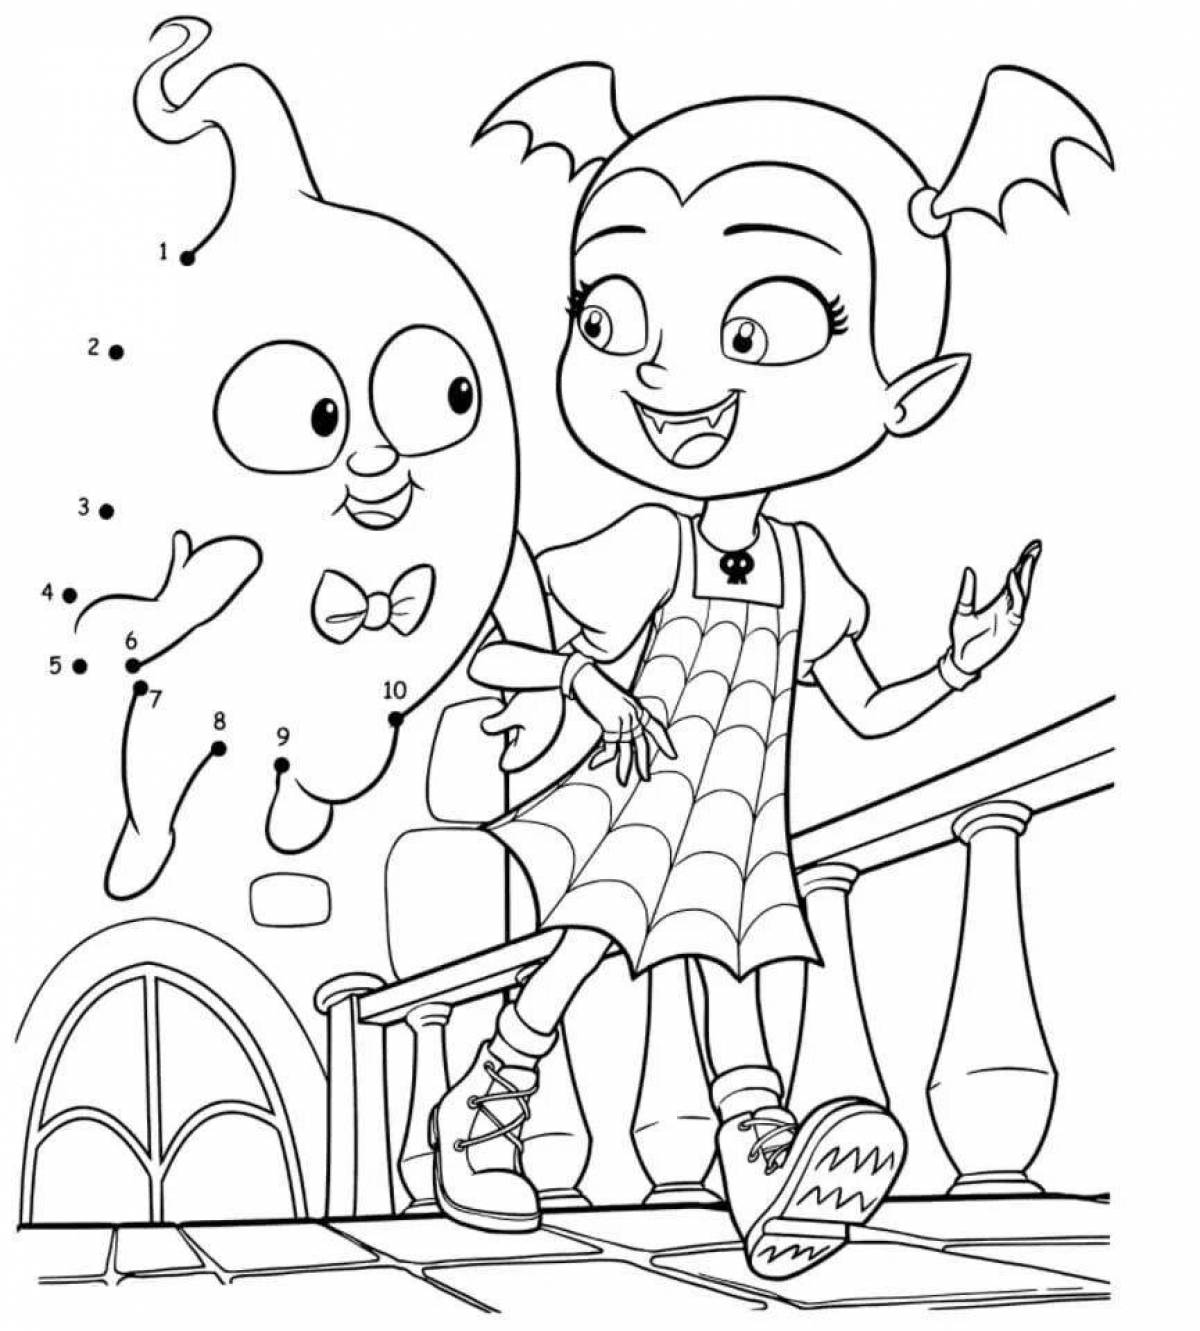 Smiling baby vee coloring book